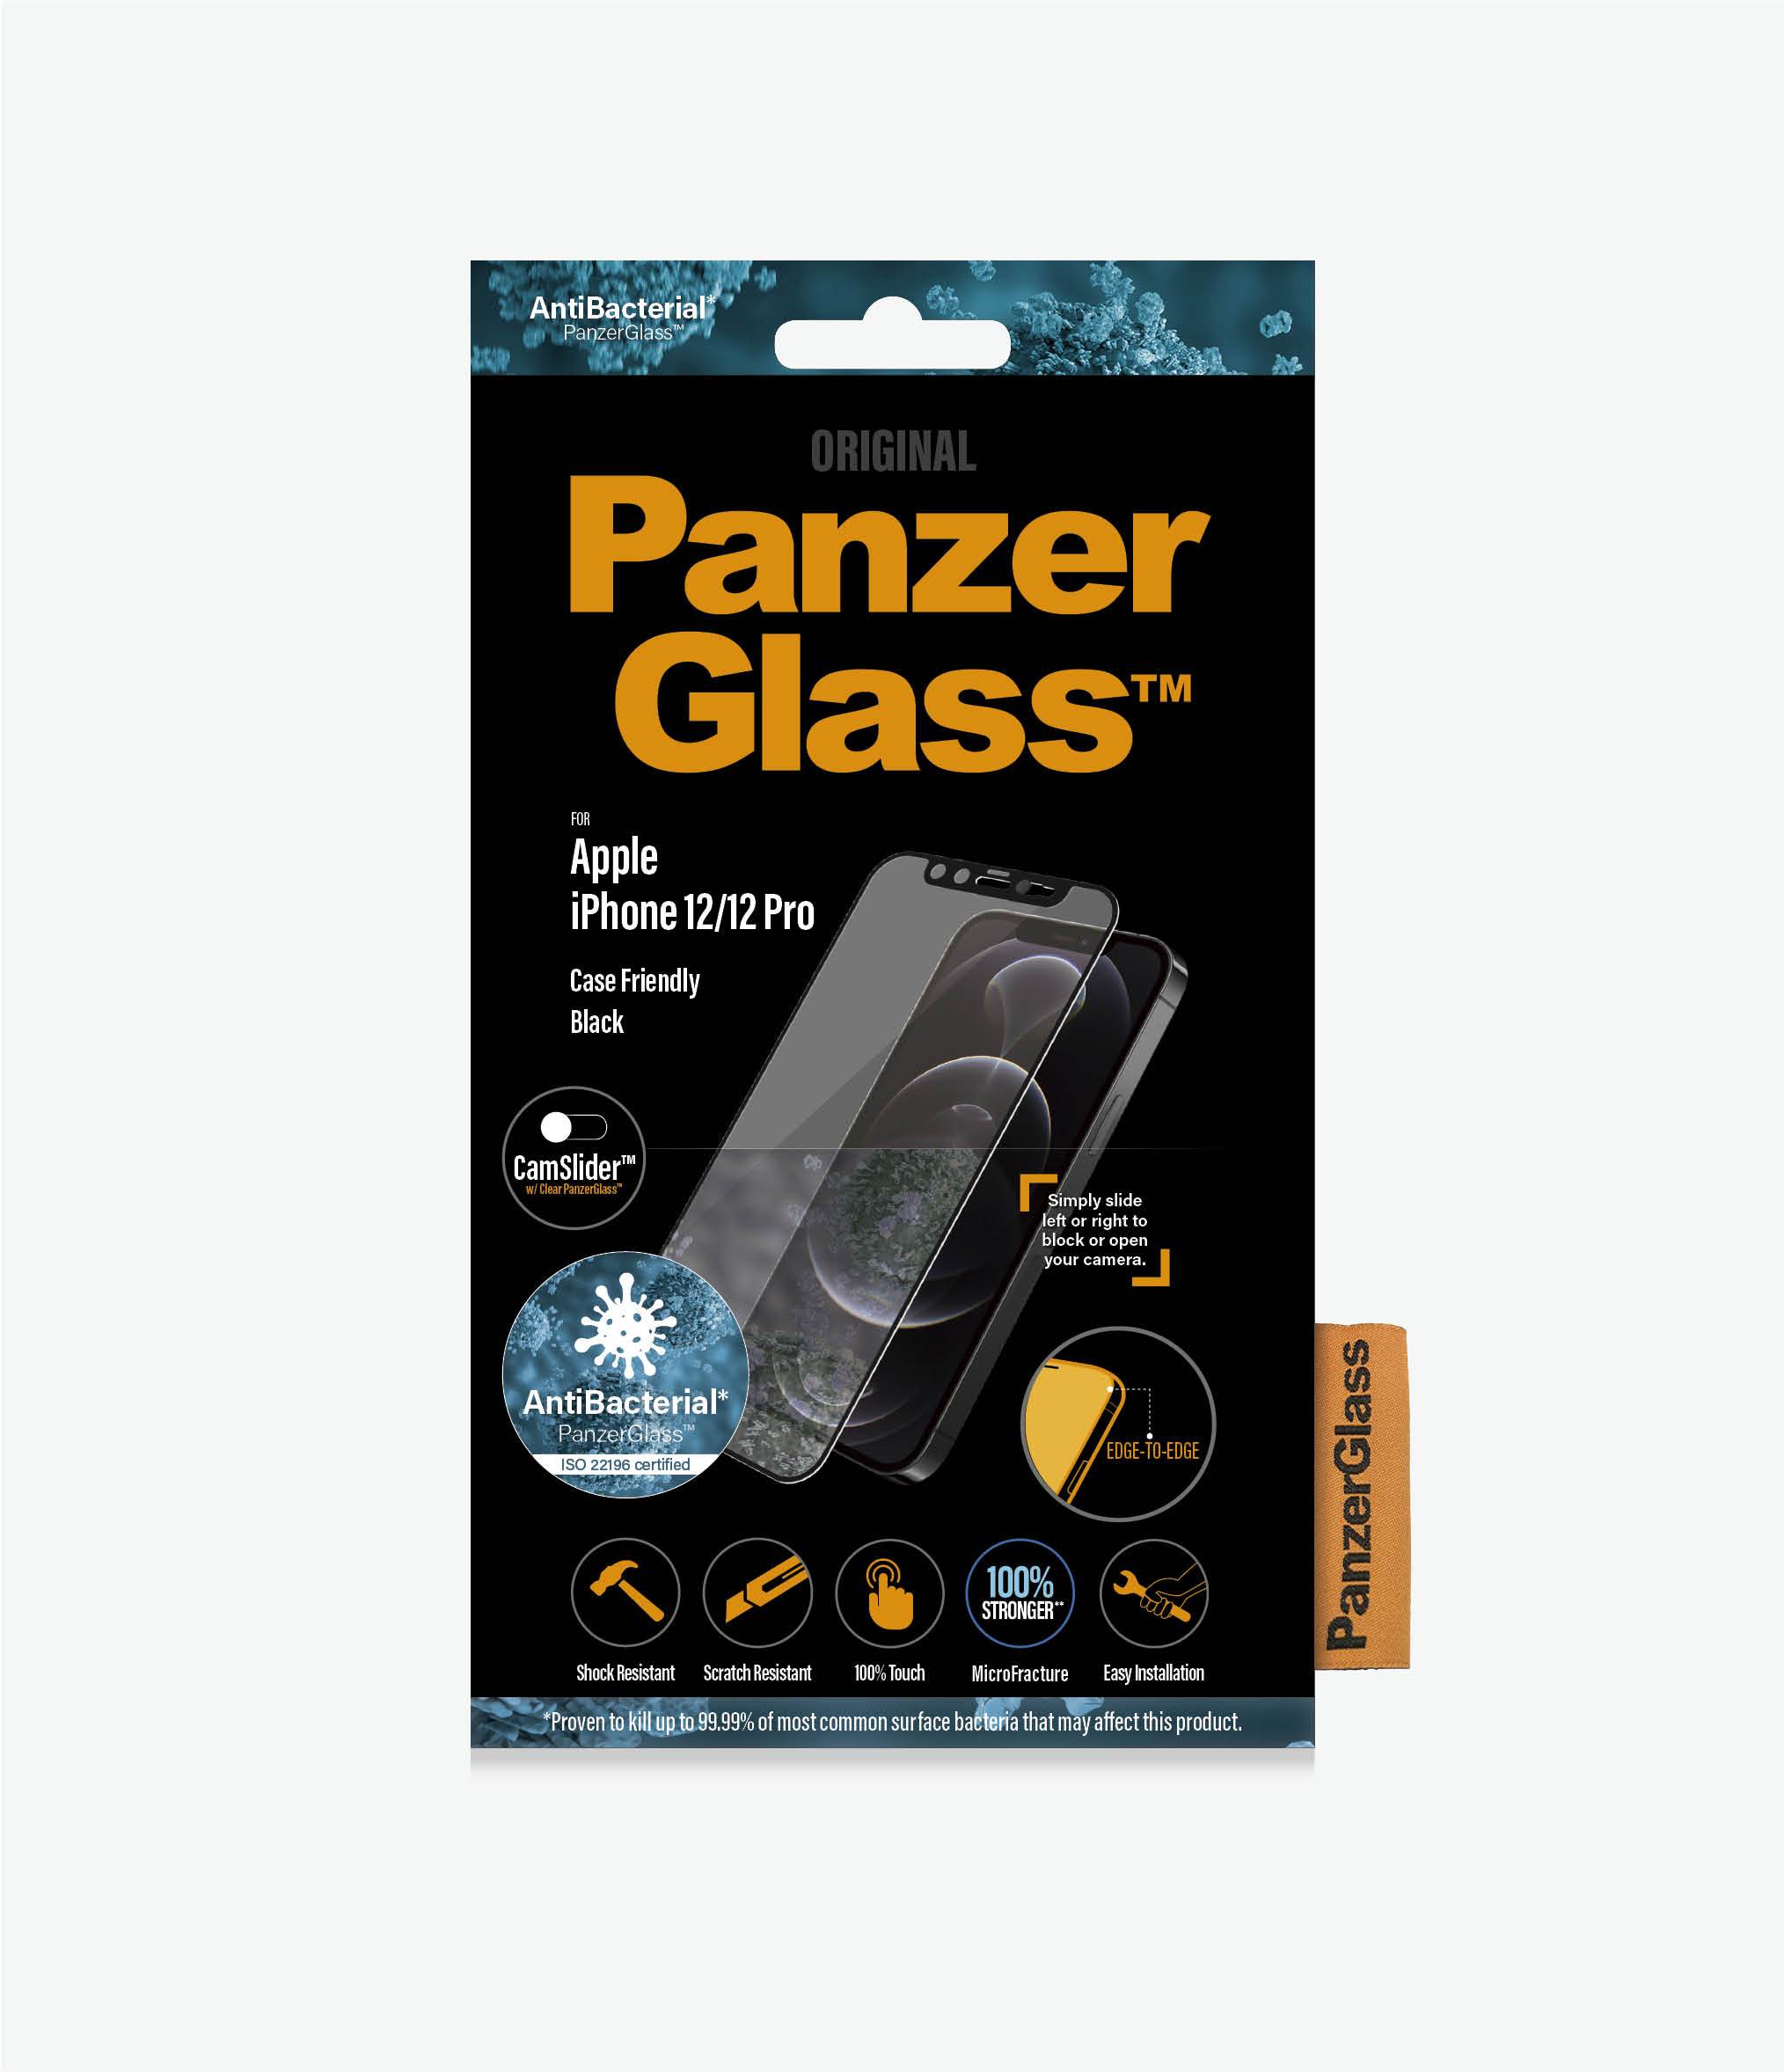 PanzerGlass™ Apple iPhone 12/12 Pro Black CamSlider™ - (2714) - Screen Protector - Resistant to scratches and bacteria, Shock absorbing, Crystal clear